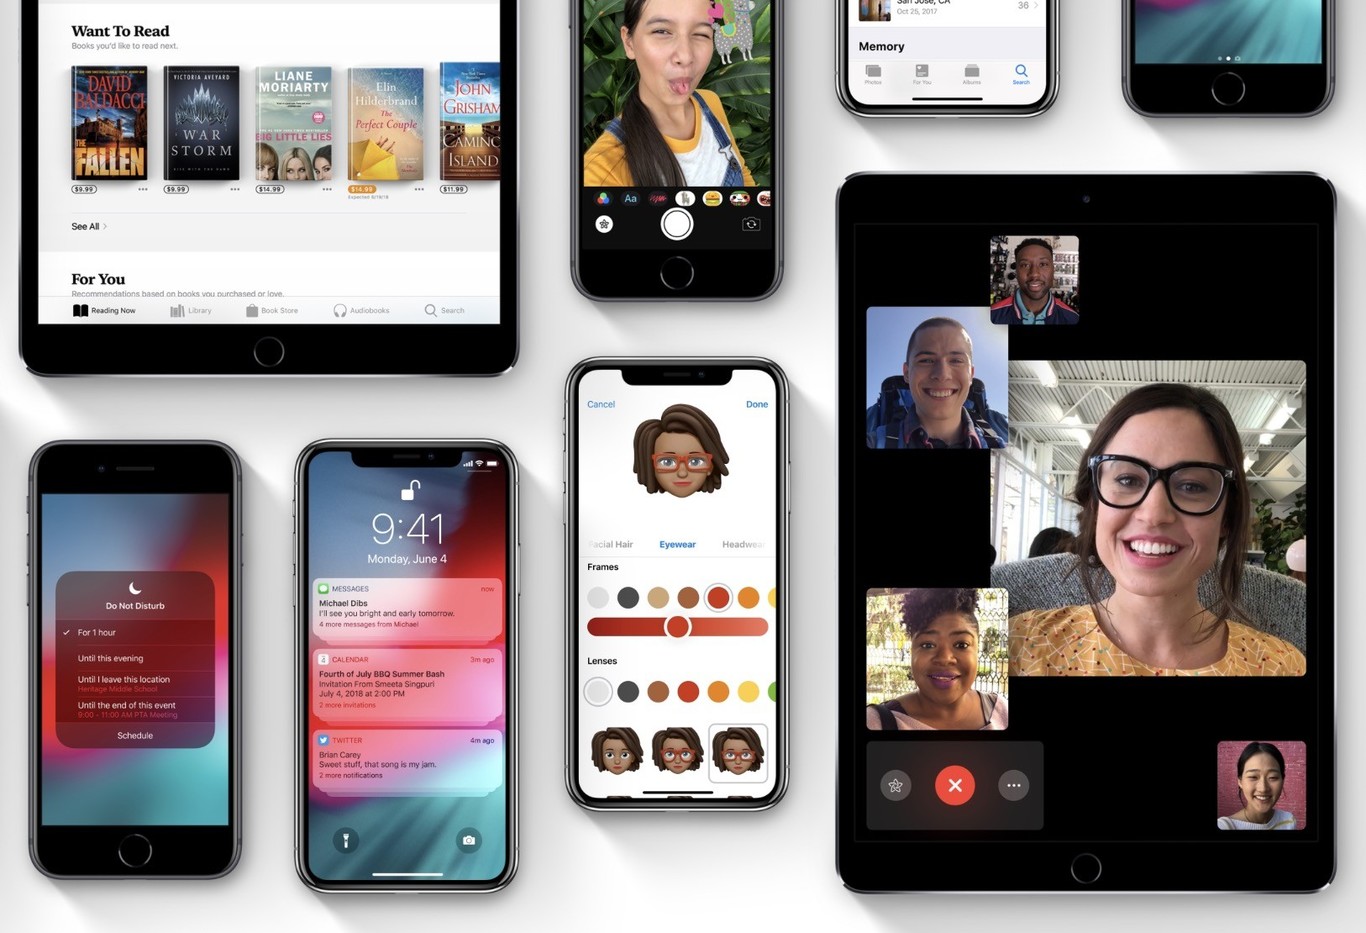 Release Date of iOS 12 and watchOS 5, macOS Mojave Confirmed